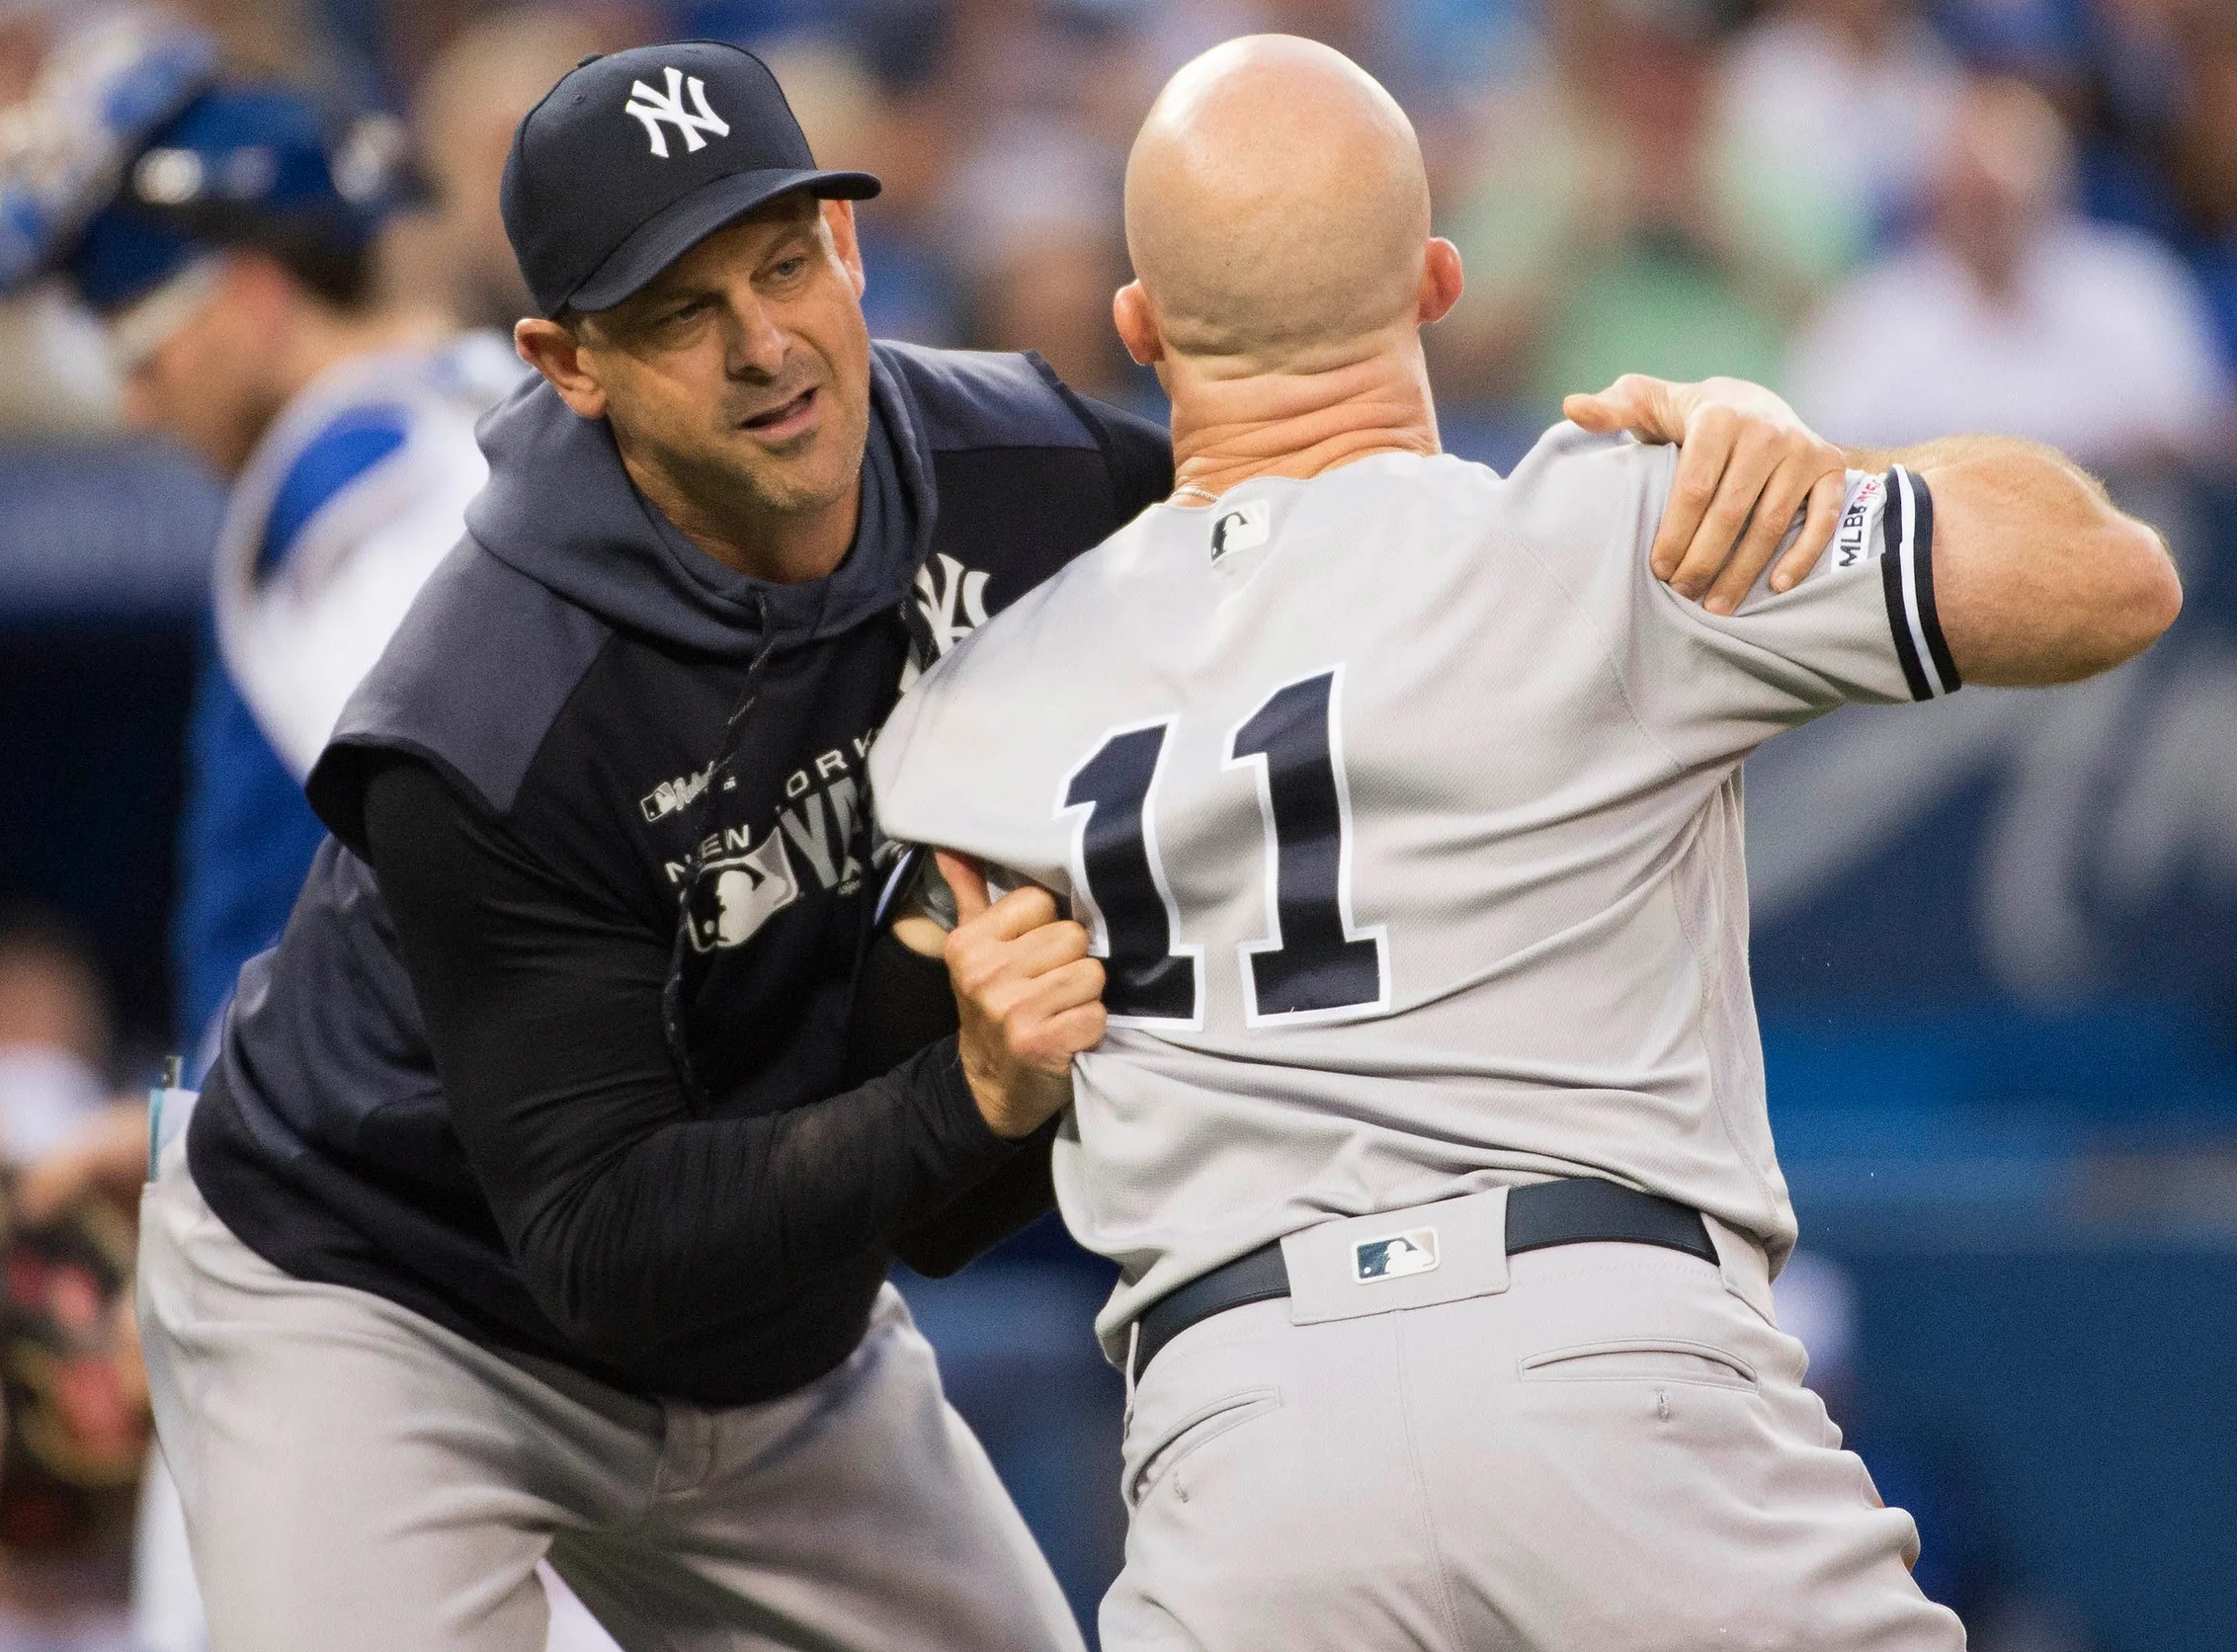 Yankees manager Brian Cashman stops Brett Gardner, who is charging toward the umpire, at Rogers Center on Aug 9, 2019.